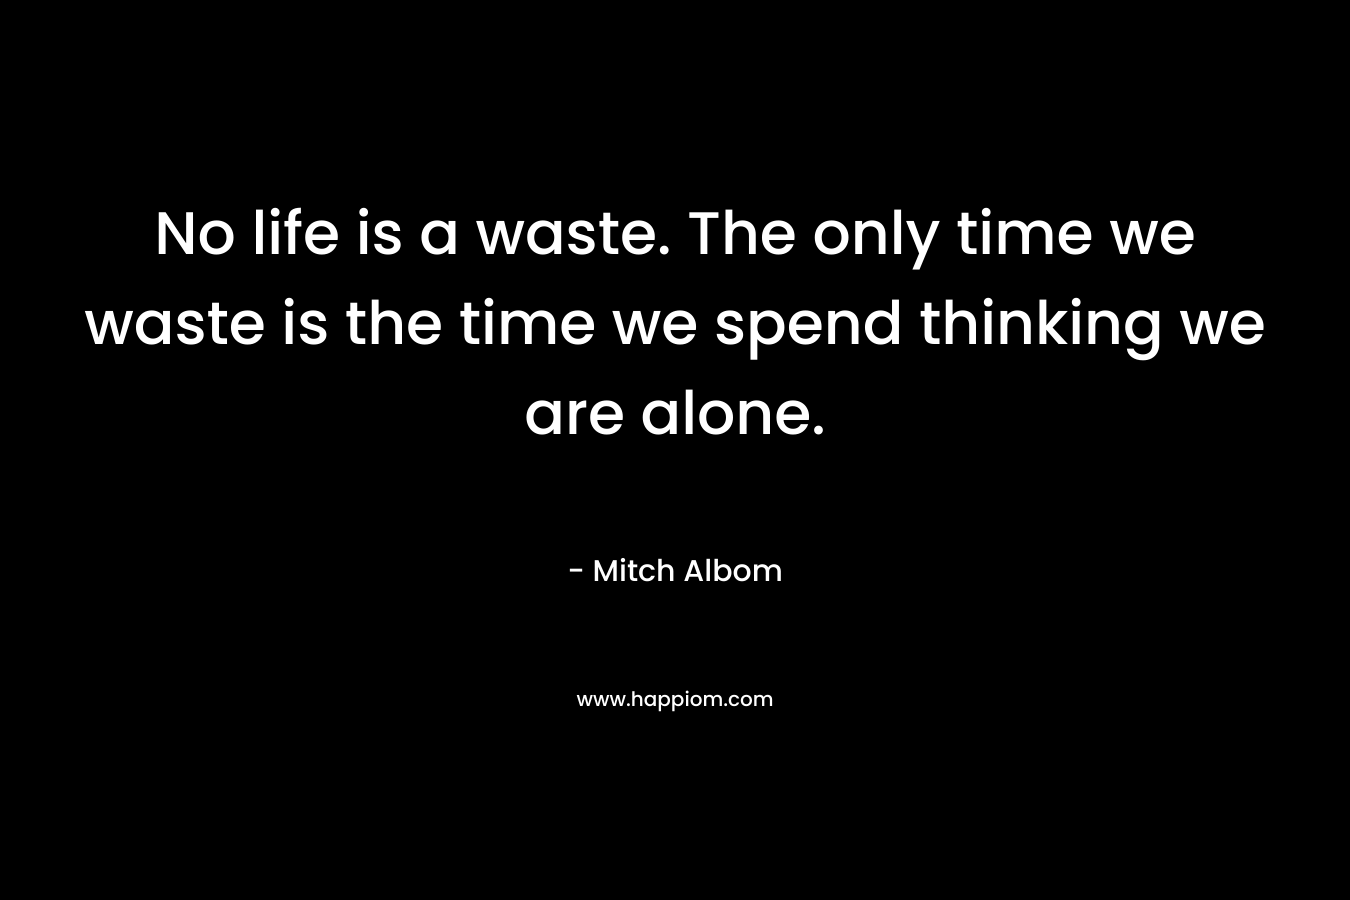 No life is a waste. The only time we waste is the time we spend thinking we are alone.